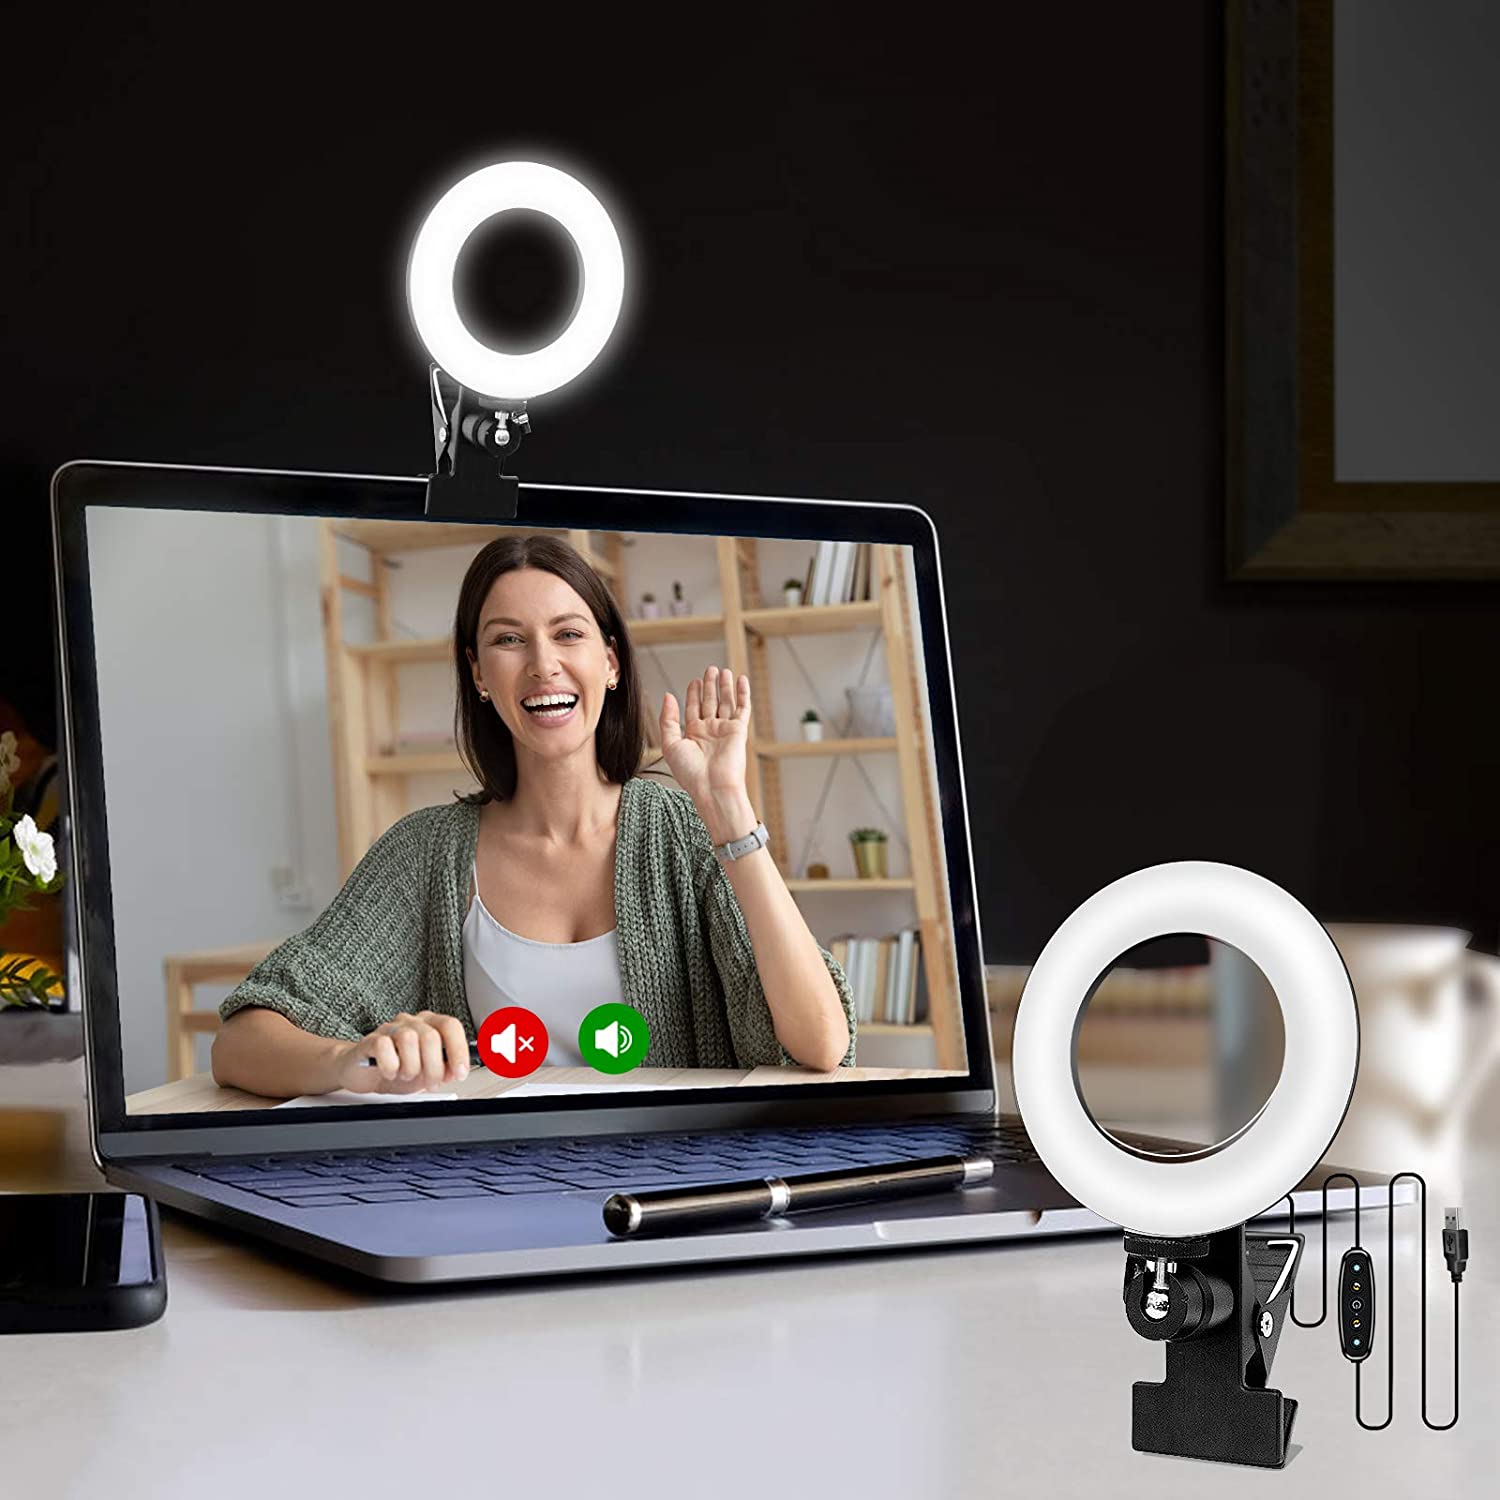 waysad Video Fill Light Conference Lighting Kit Adjustable Universal Computer Live Lamp Remote Working Zoom Calls Webinar Lighting,Self Broadcasting And Live Streaming,Strong Suction